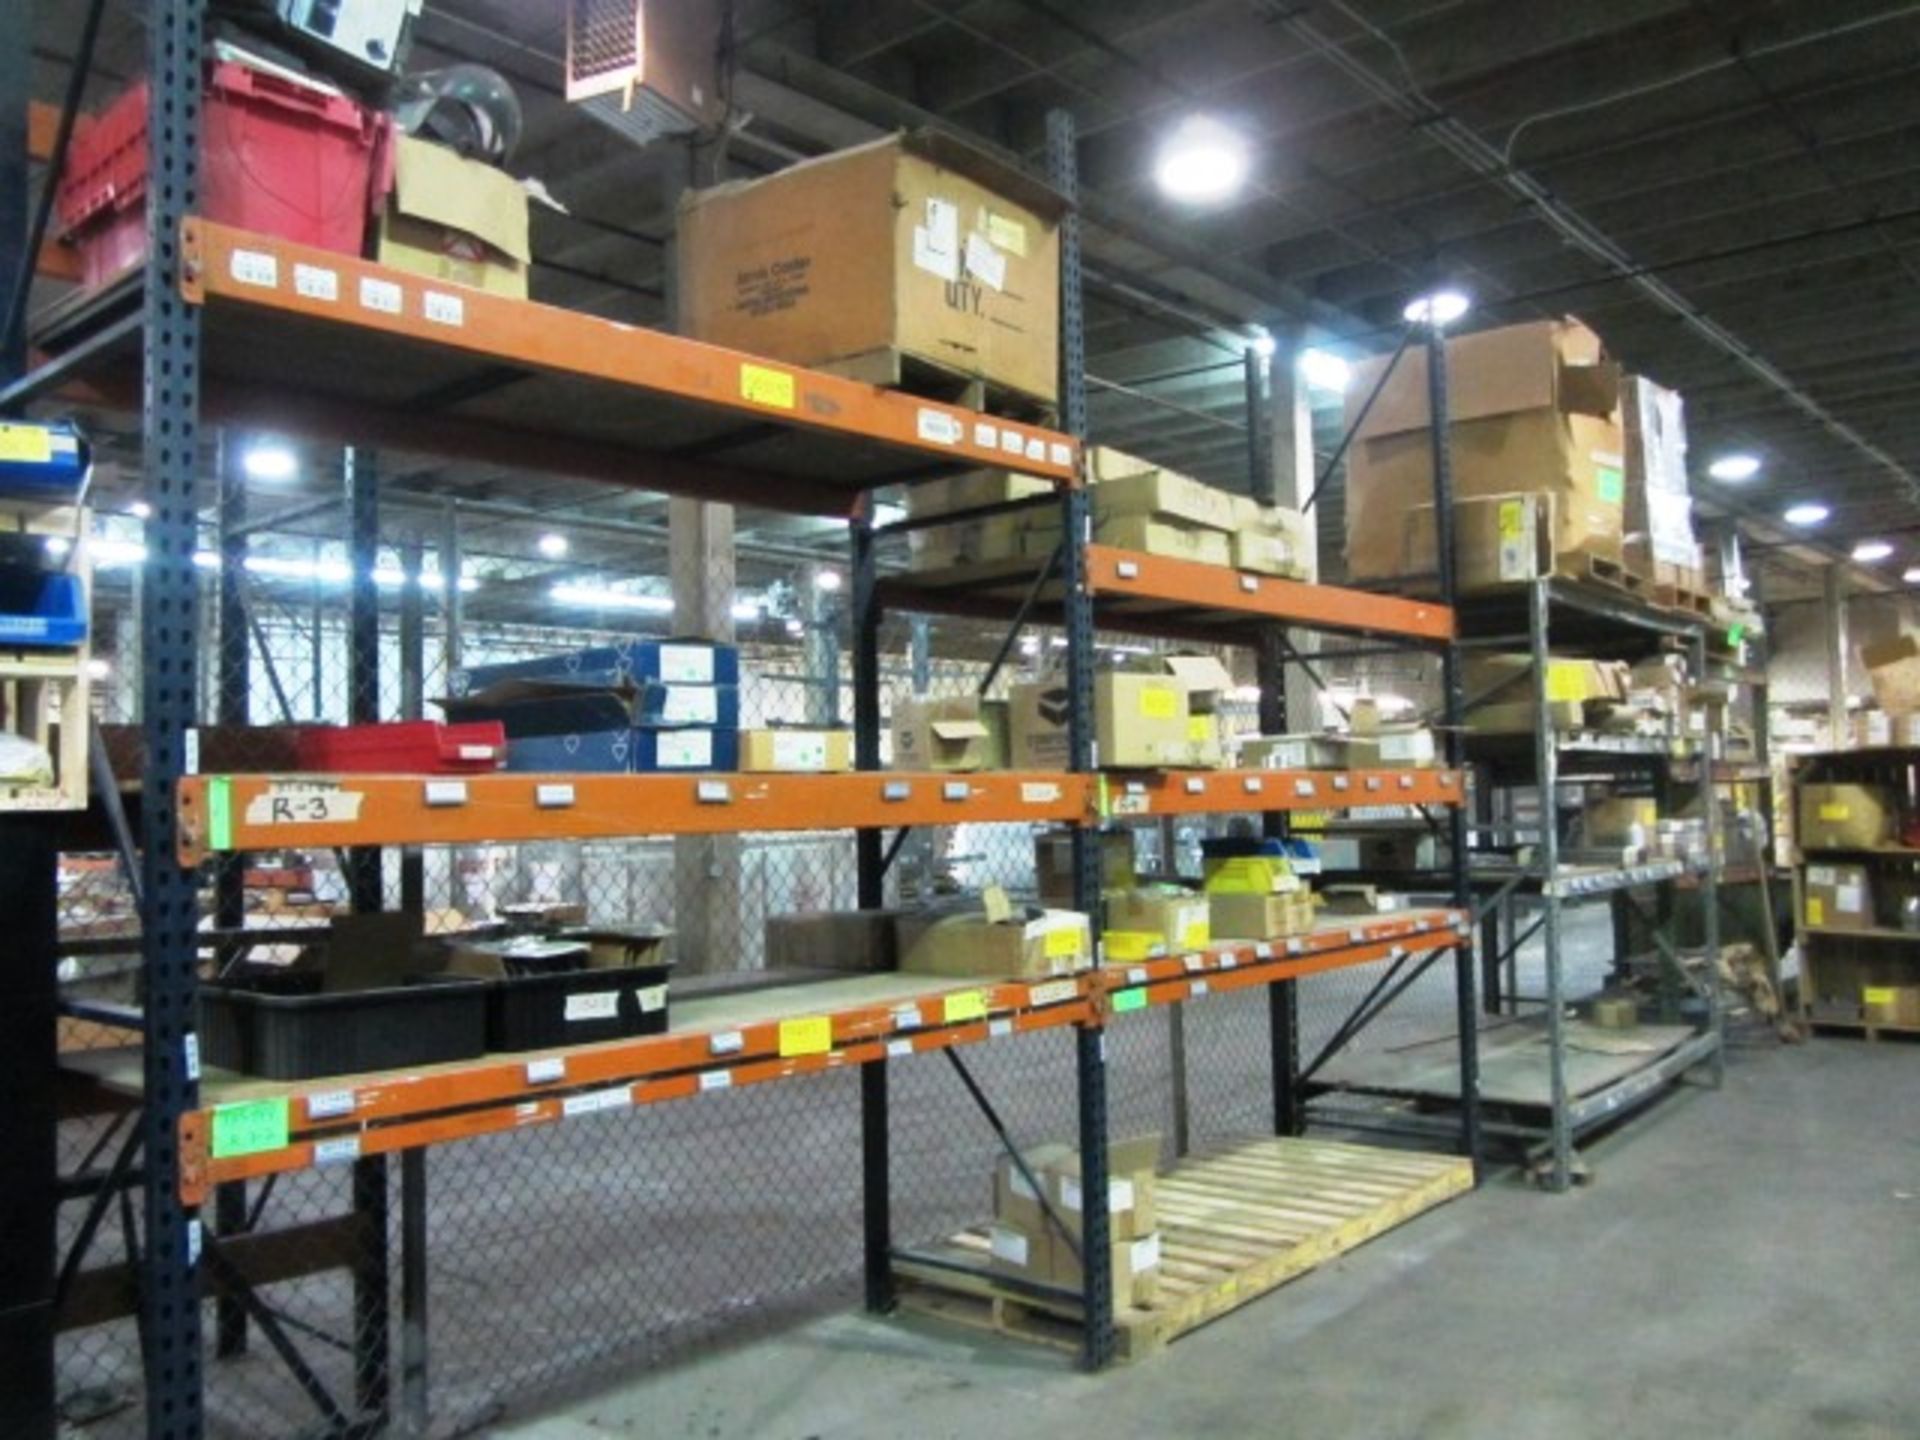 Contents of (4) Pallet Racks consisting of Assembly Parts, Misc